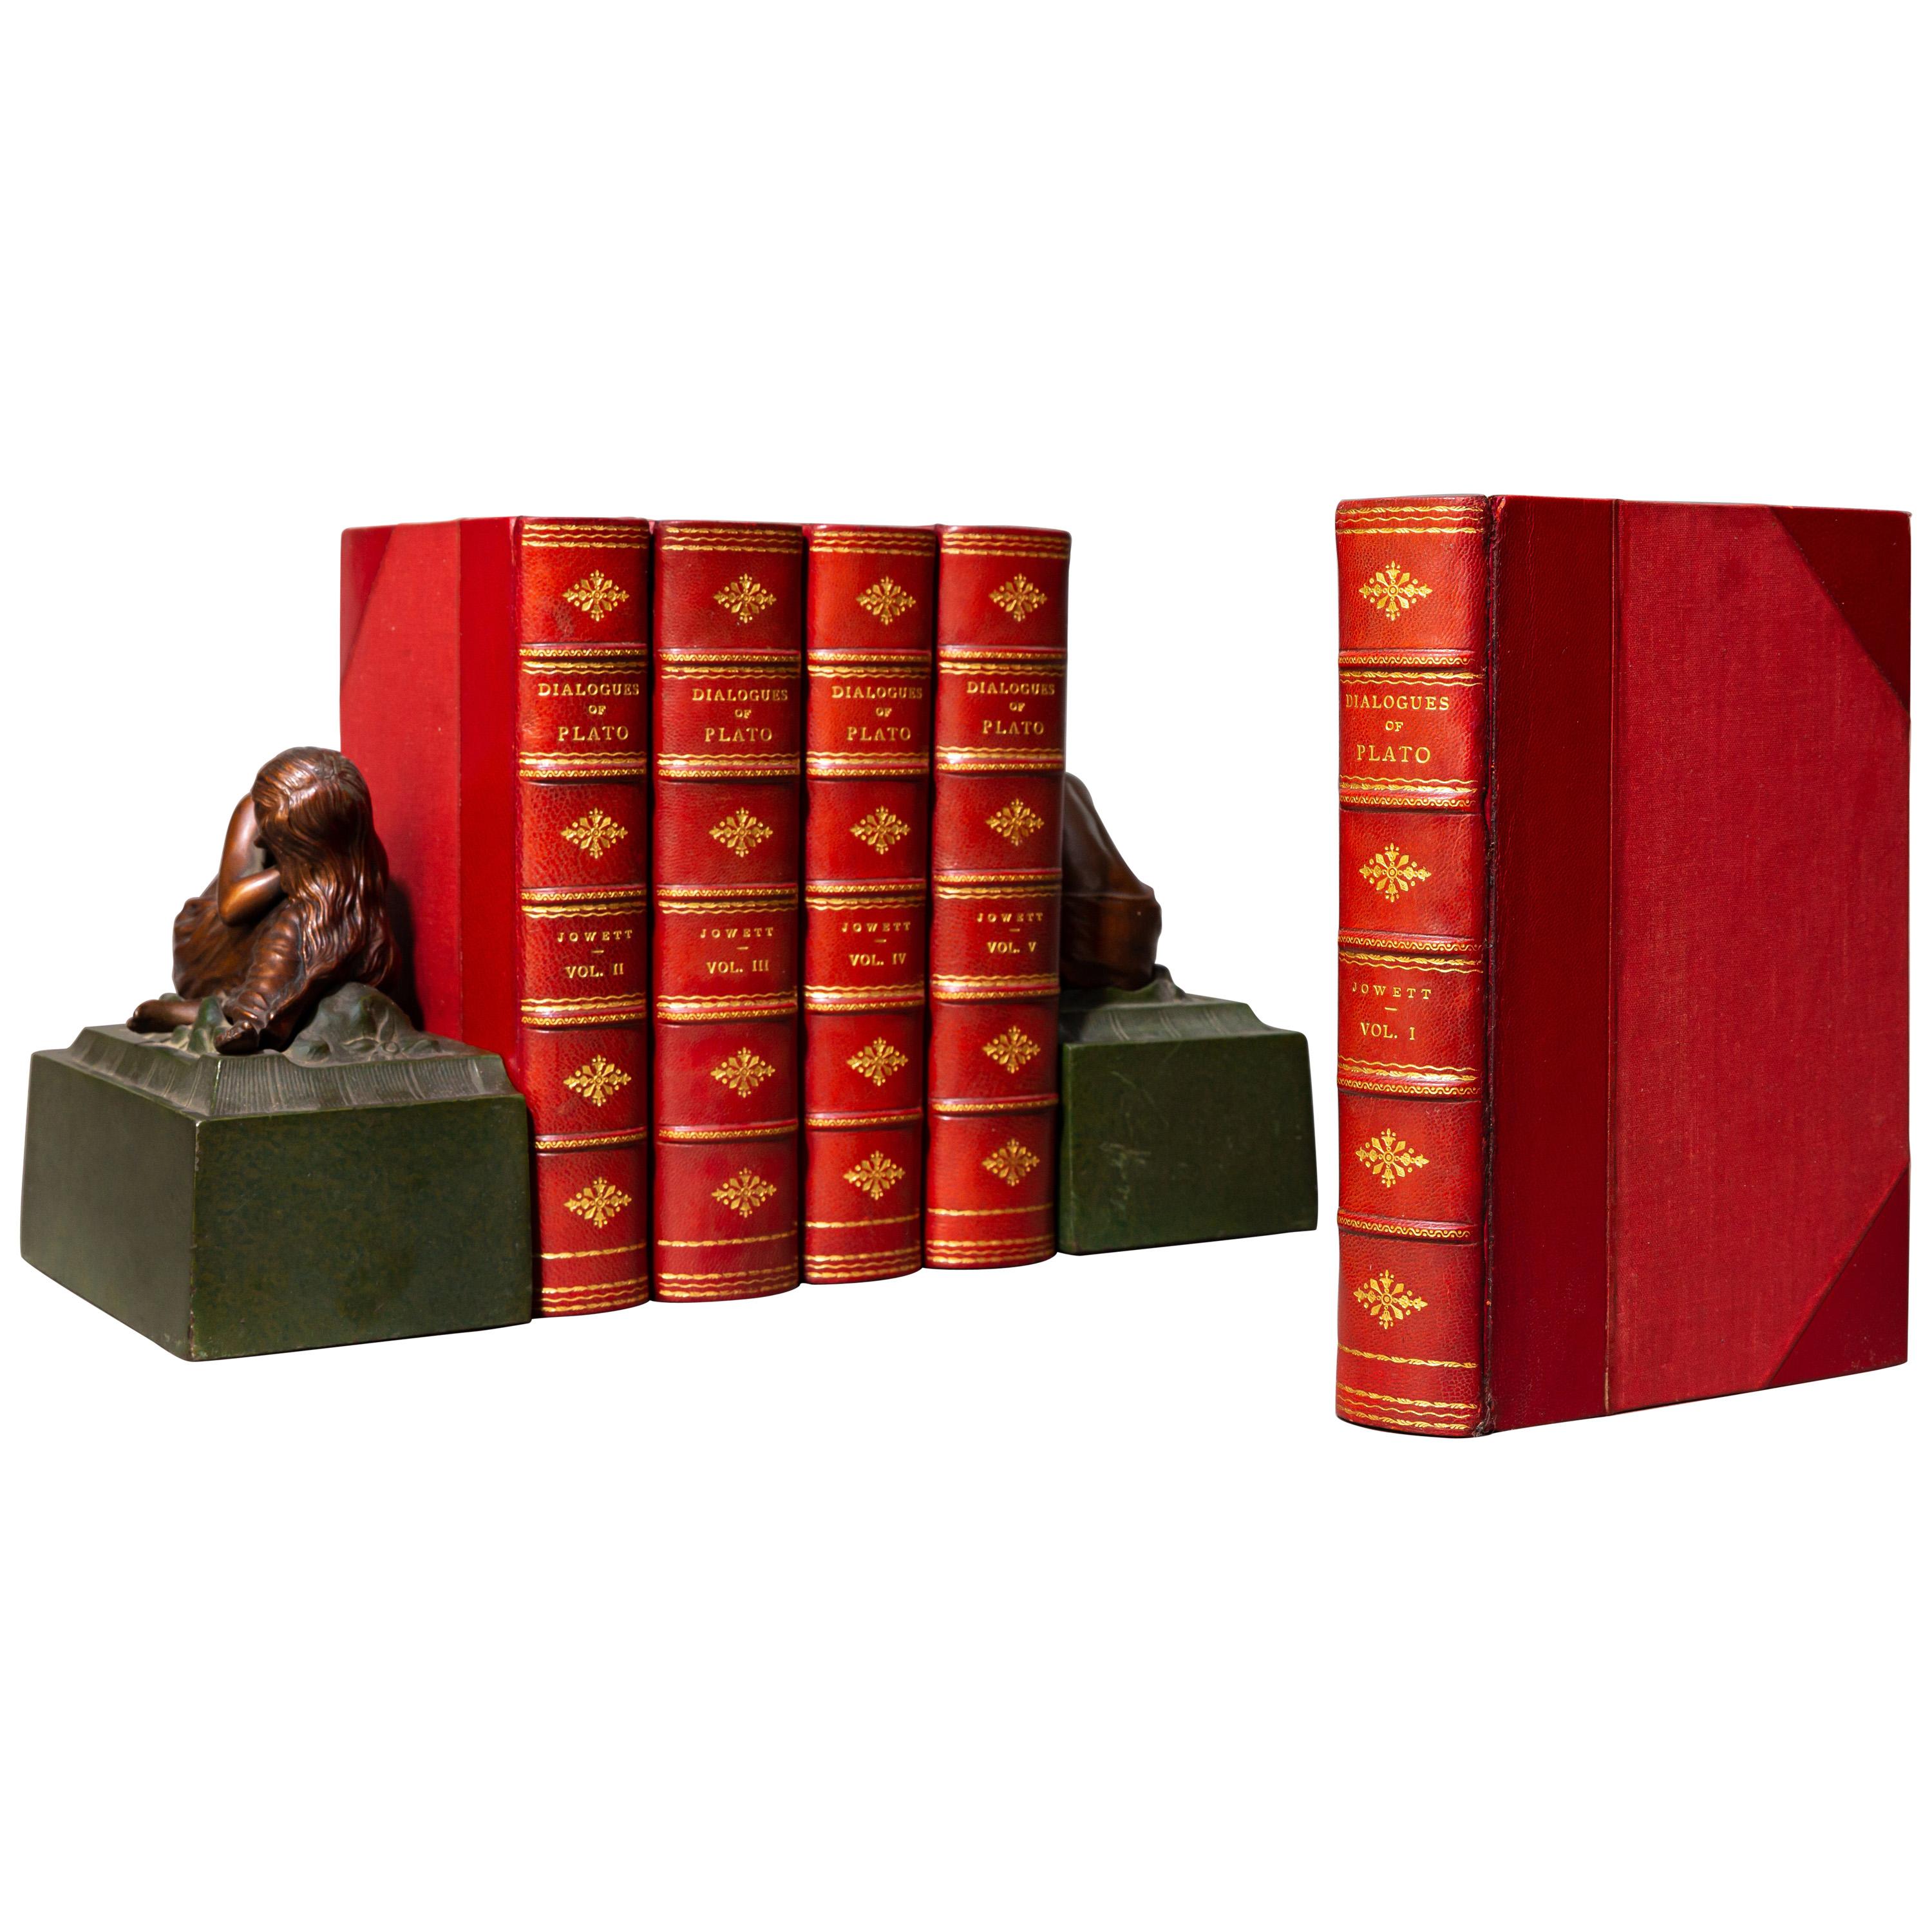 5 Volumes. 

Bound in 3/4 red Morocco, Cloth boards, top edges gilt, raised bands, gilt panels. 

Published: London:  Oxford University Press 1892. 

   